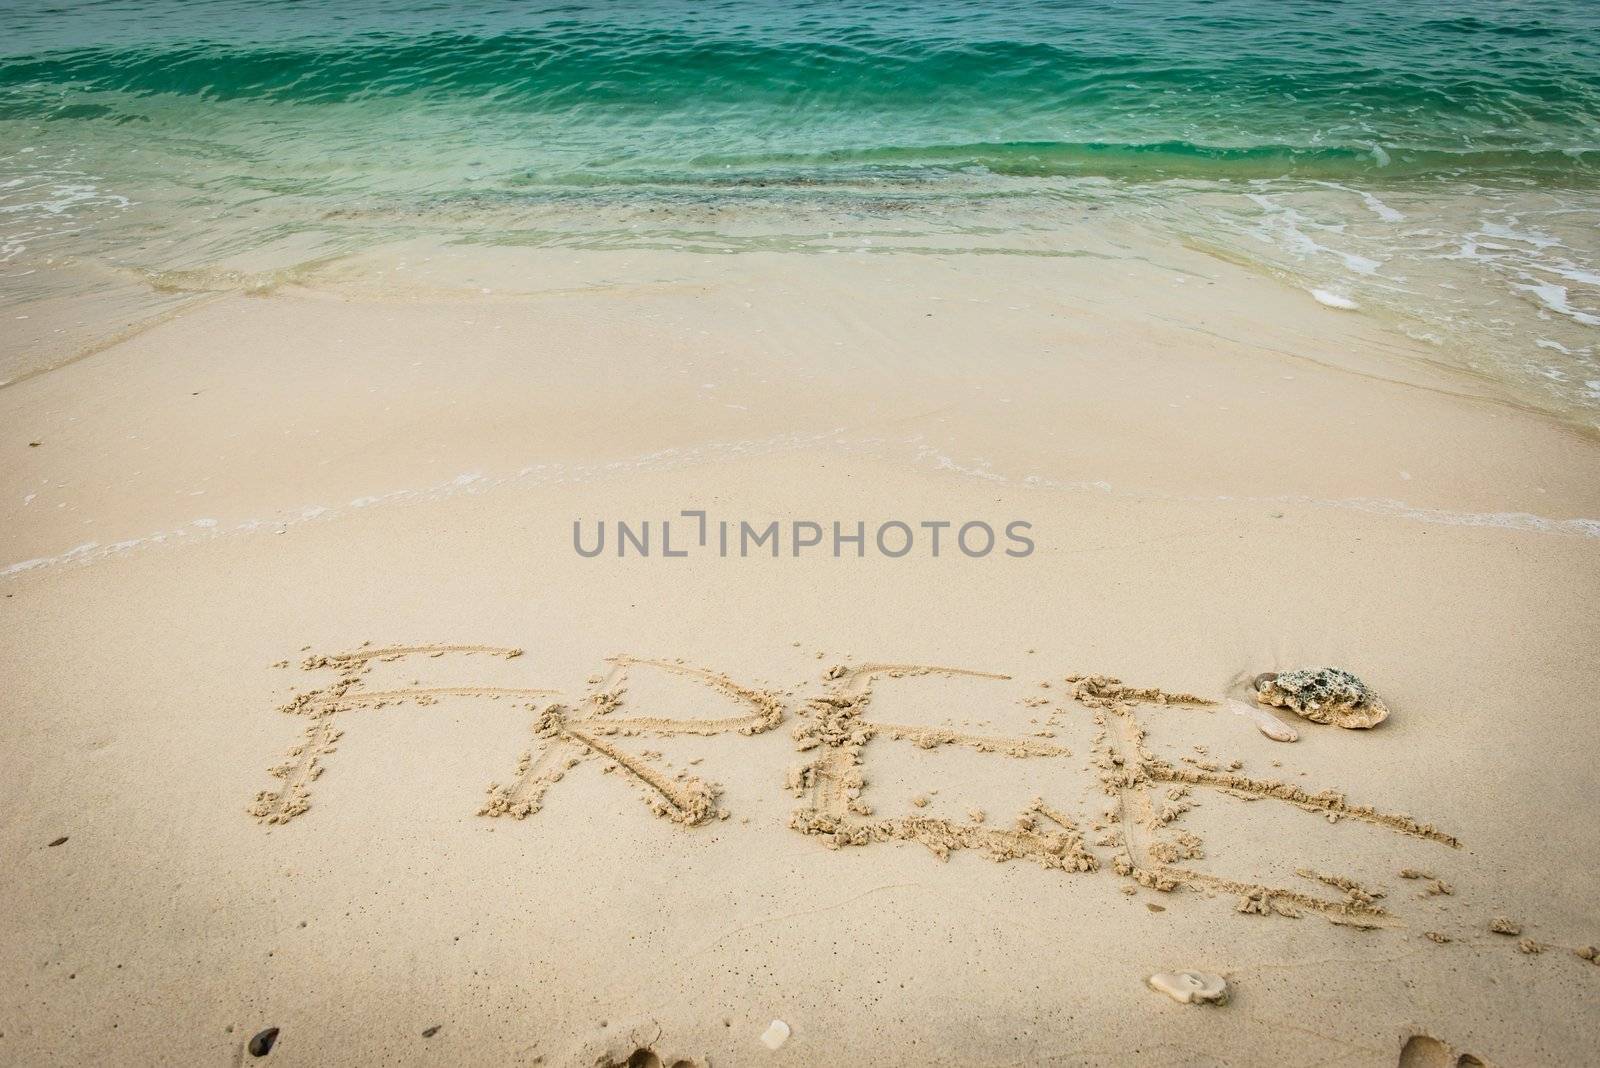 Beach on gulf of Thailand with word Free written on the sand, taken on a sunny day